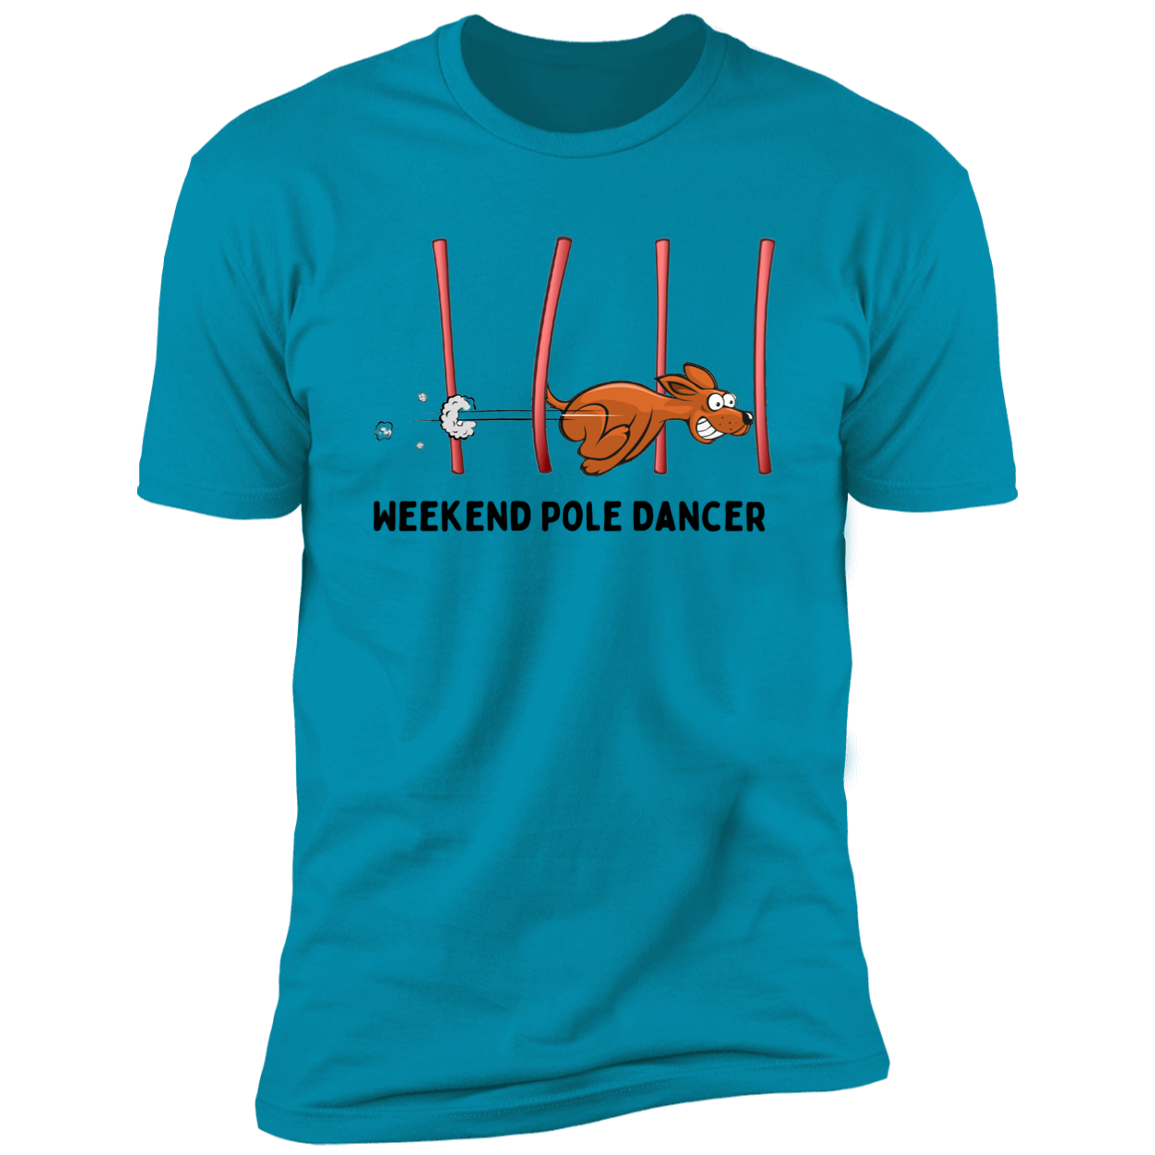 Weekend Pole Dancer Dog Agility T-Shirt, dog shirt for humans, sporting dog shirt, agility dog shirt, in turquoise